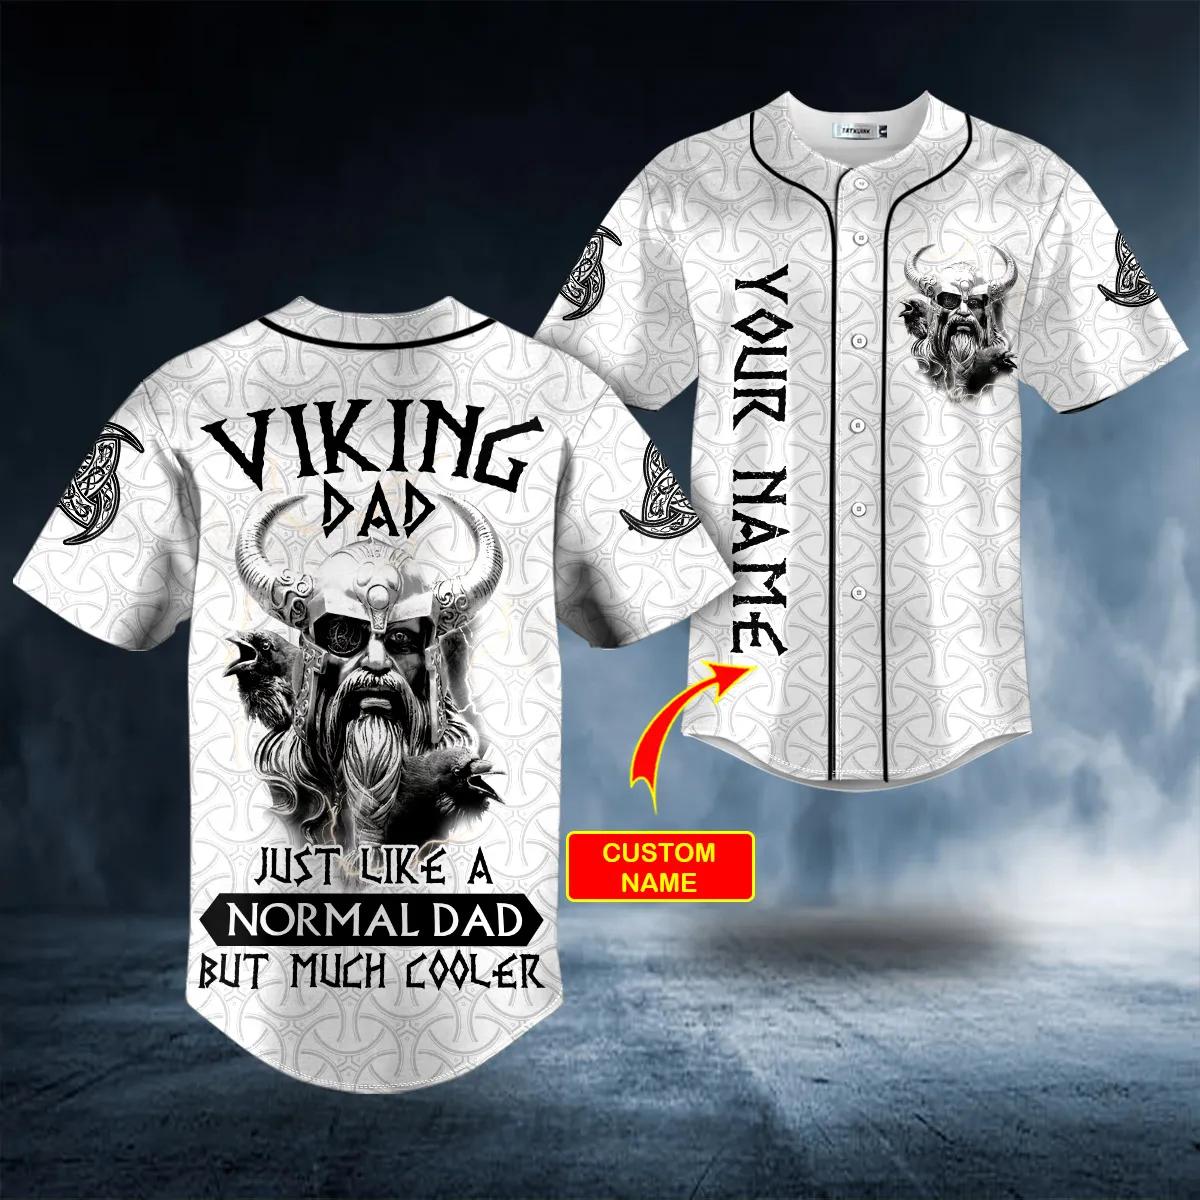 viking dad just like a normal dad but much cooler custom baseball jersey 7948 5HsyO